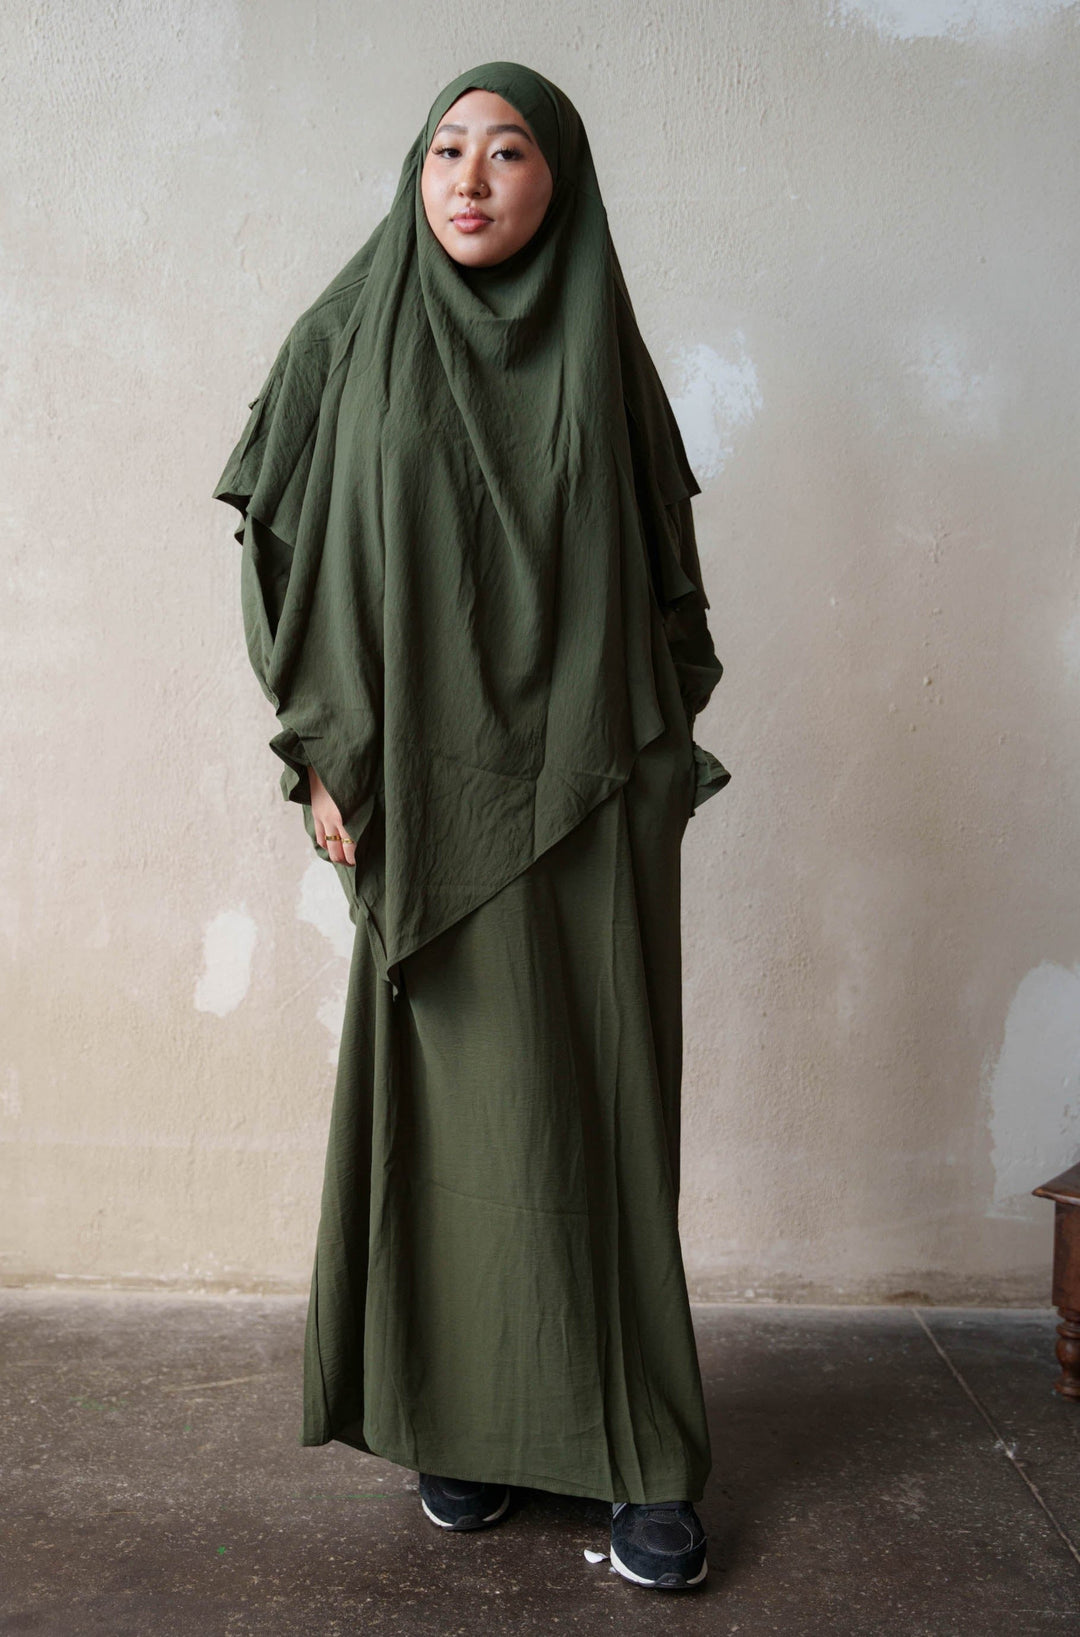 a woman wearing a green hijab standing in front of a wall